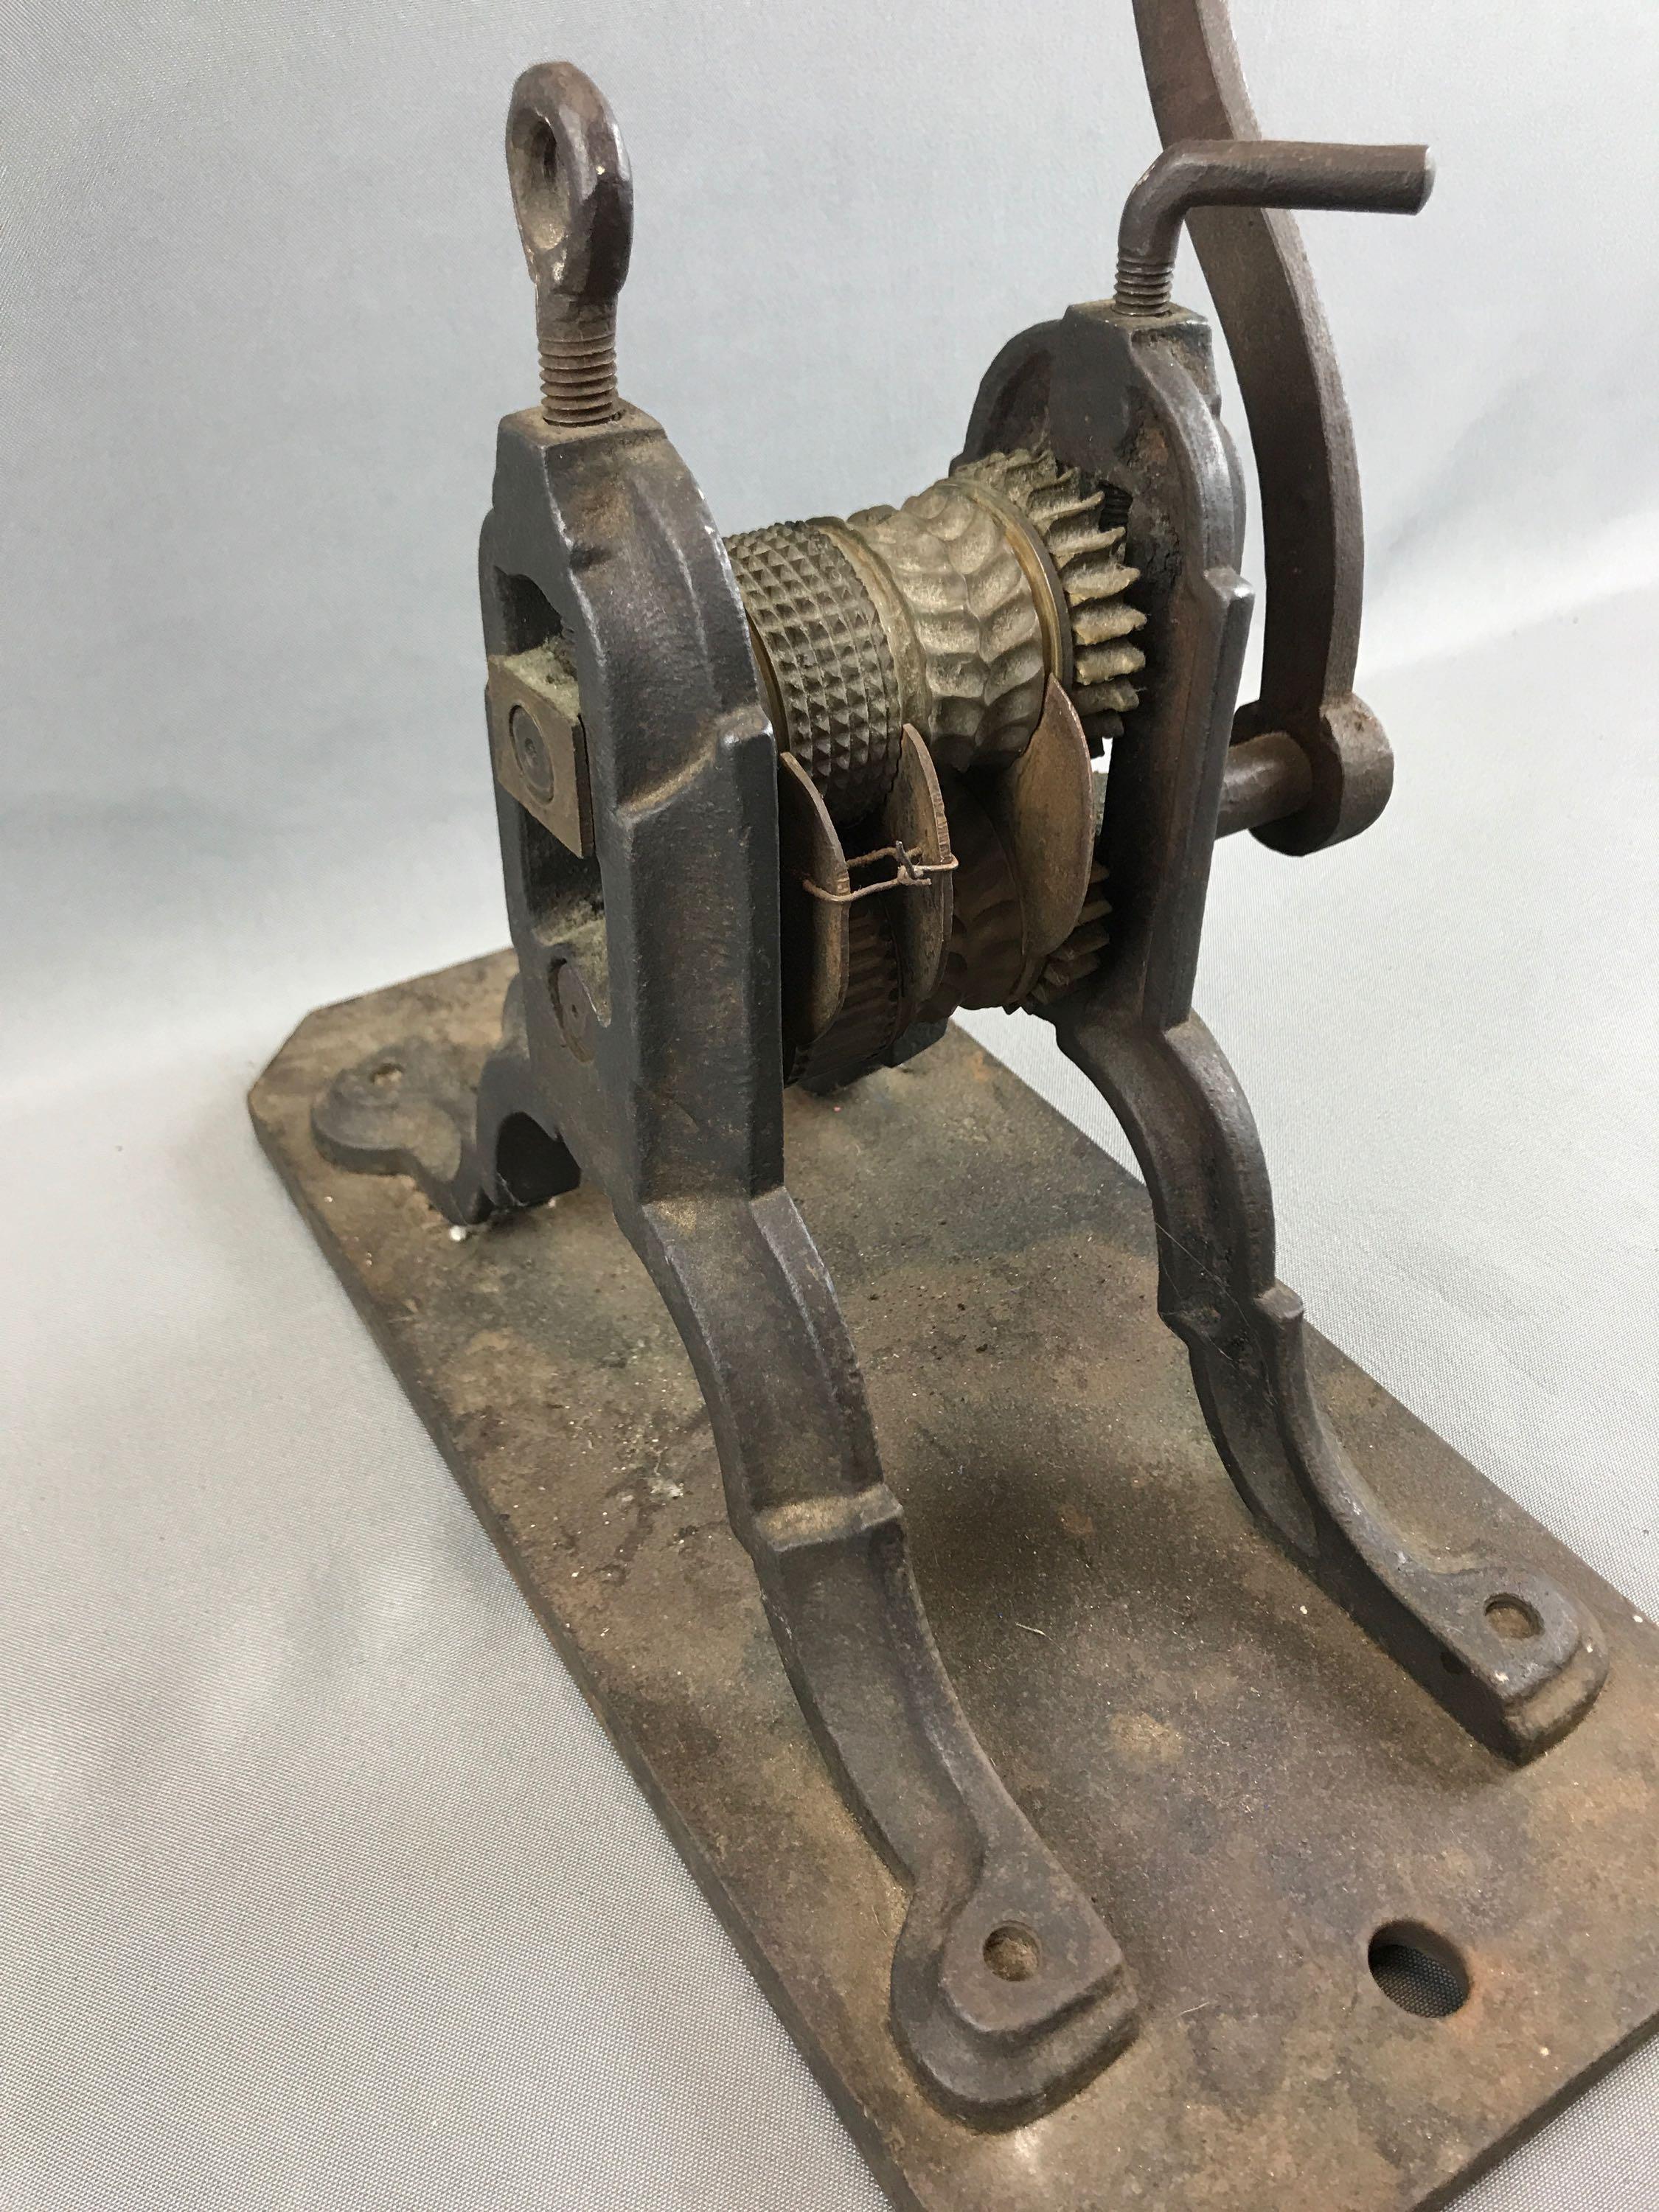 Sold at Auction: Antique Bronze & Cast Iron Fish Hard Candy Roller